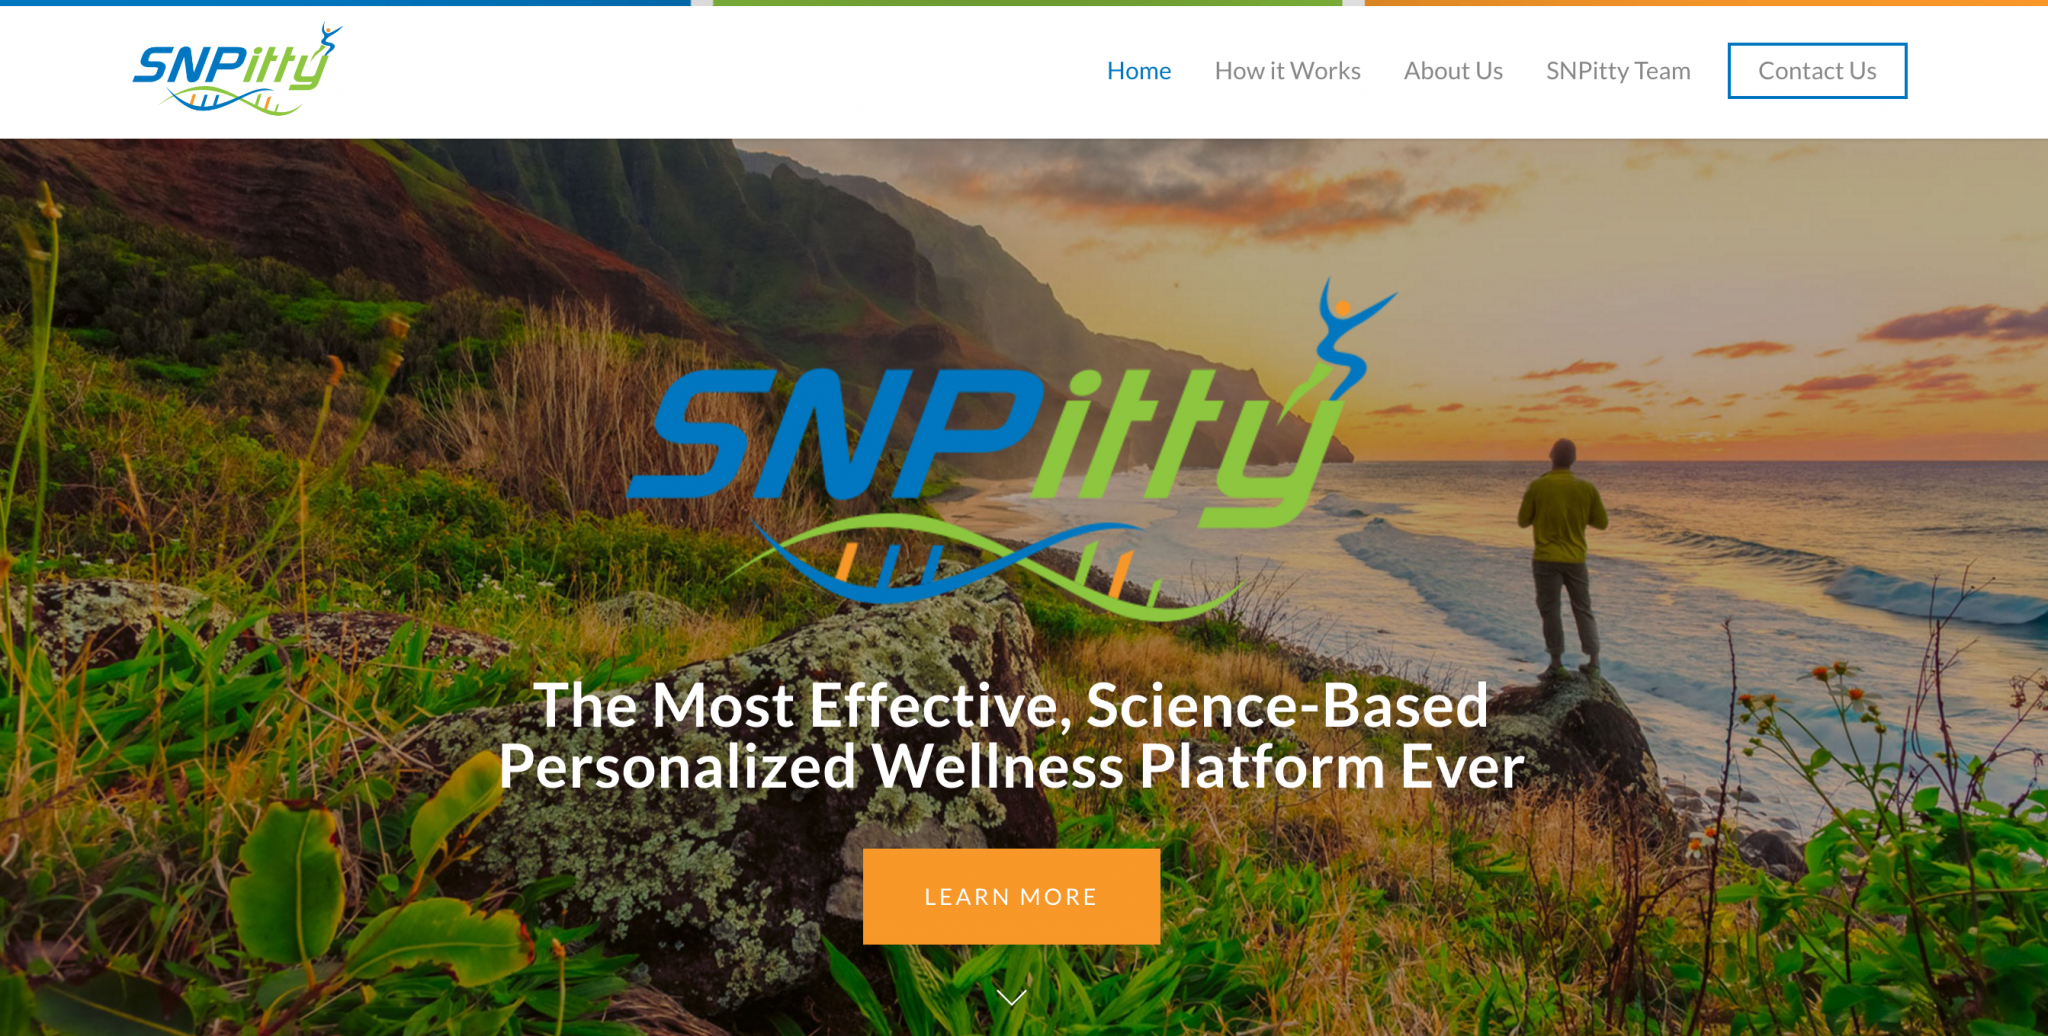 Client Shout-Out: SNPitty